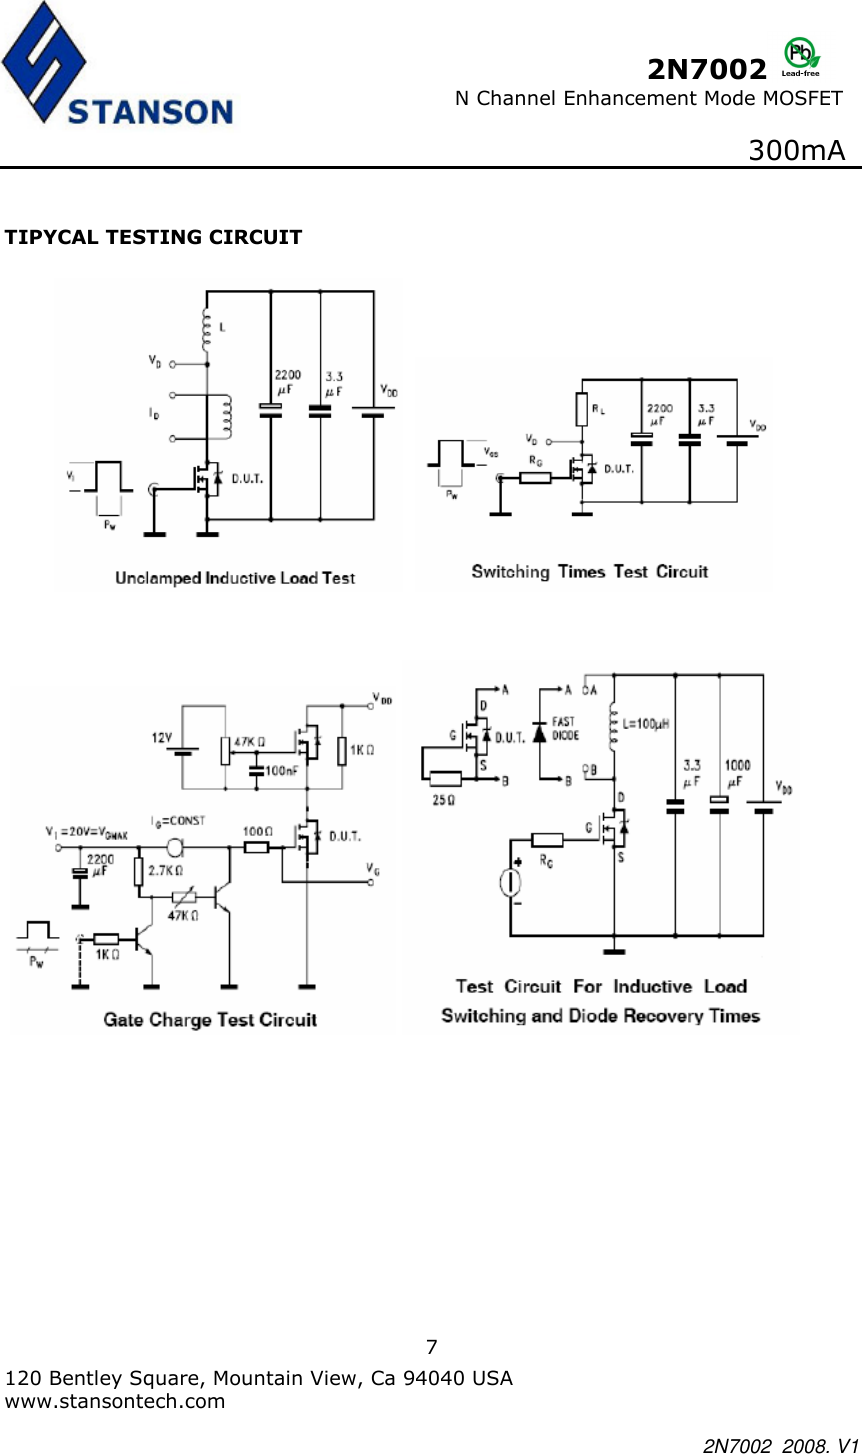 Page 7 of 9 - 2N7002 - Datasheet. Www.s-manuals.com. Stanson